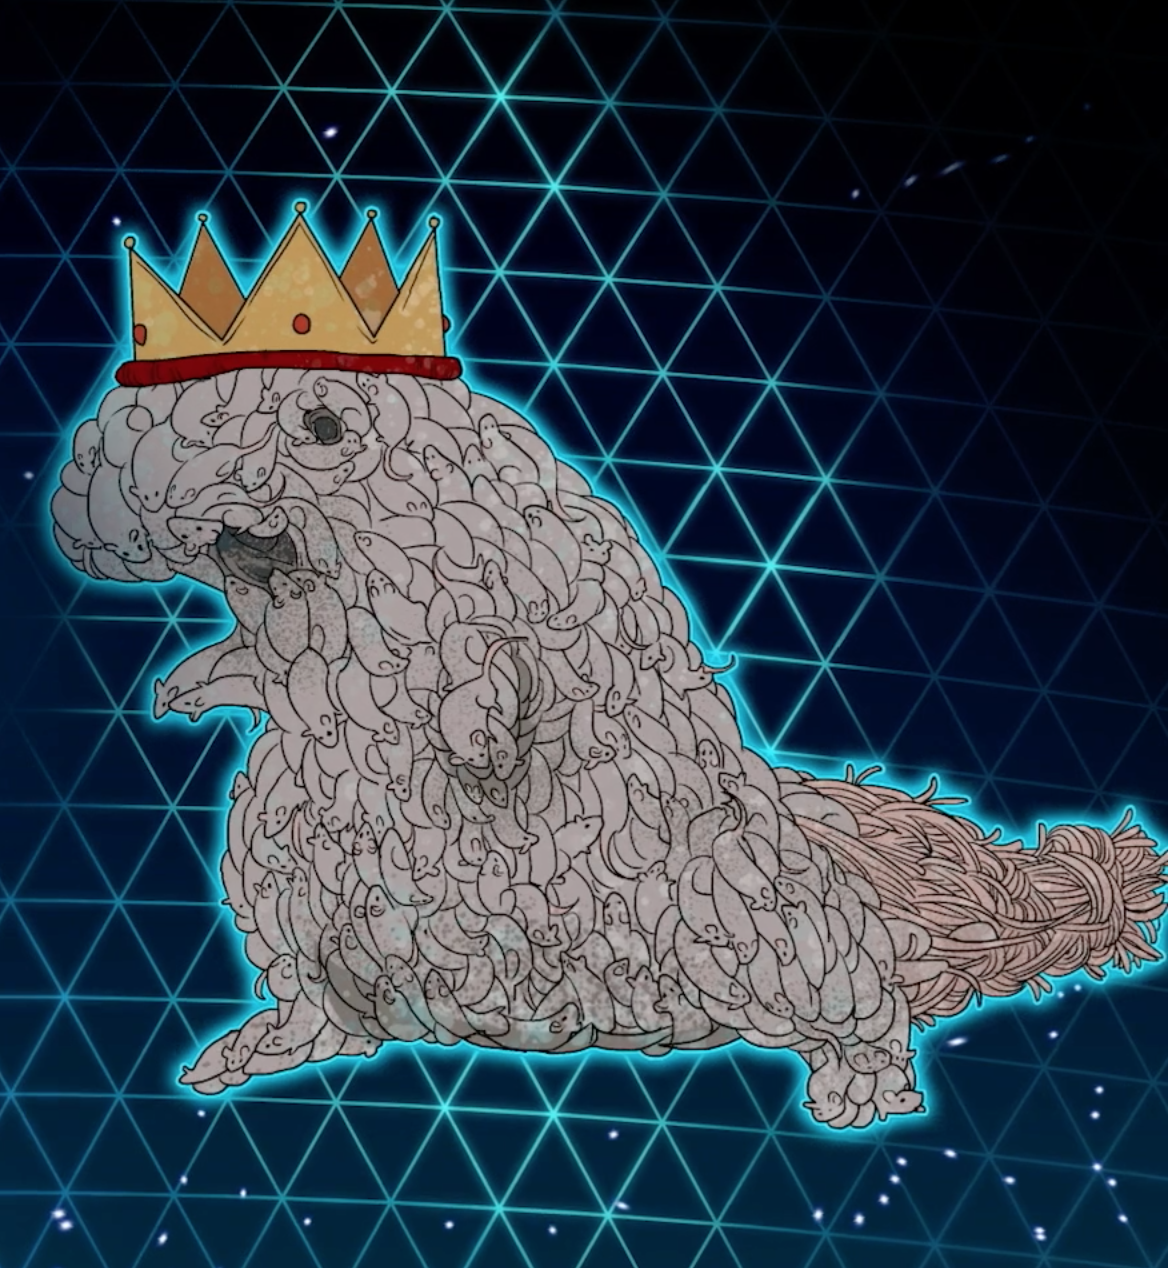 All Hail the Rat King  — The Scop